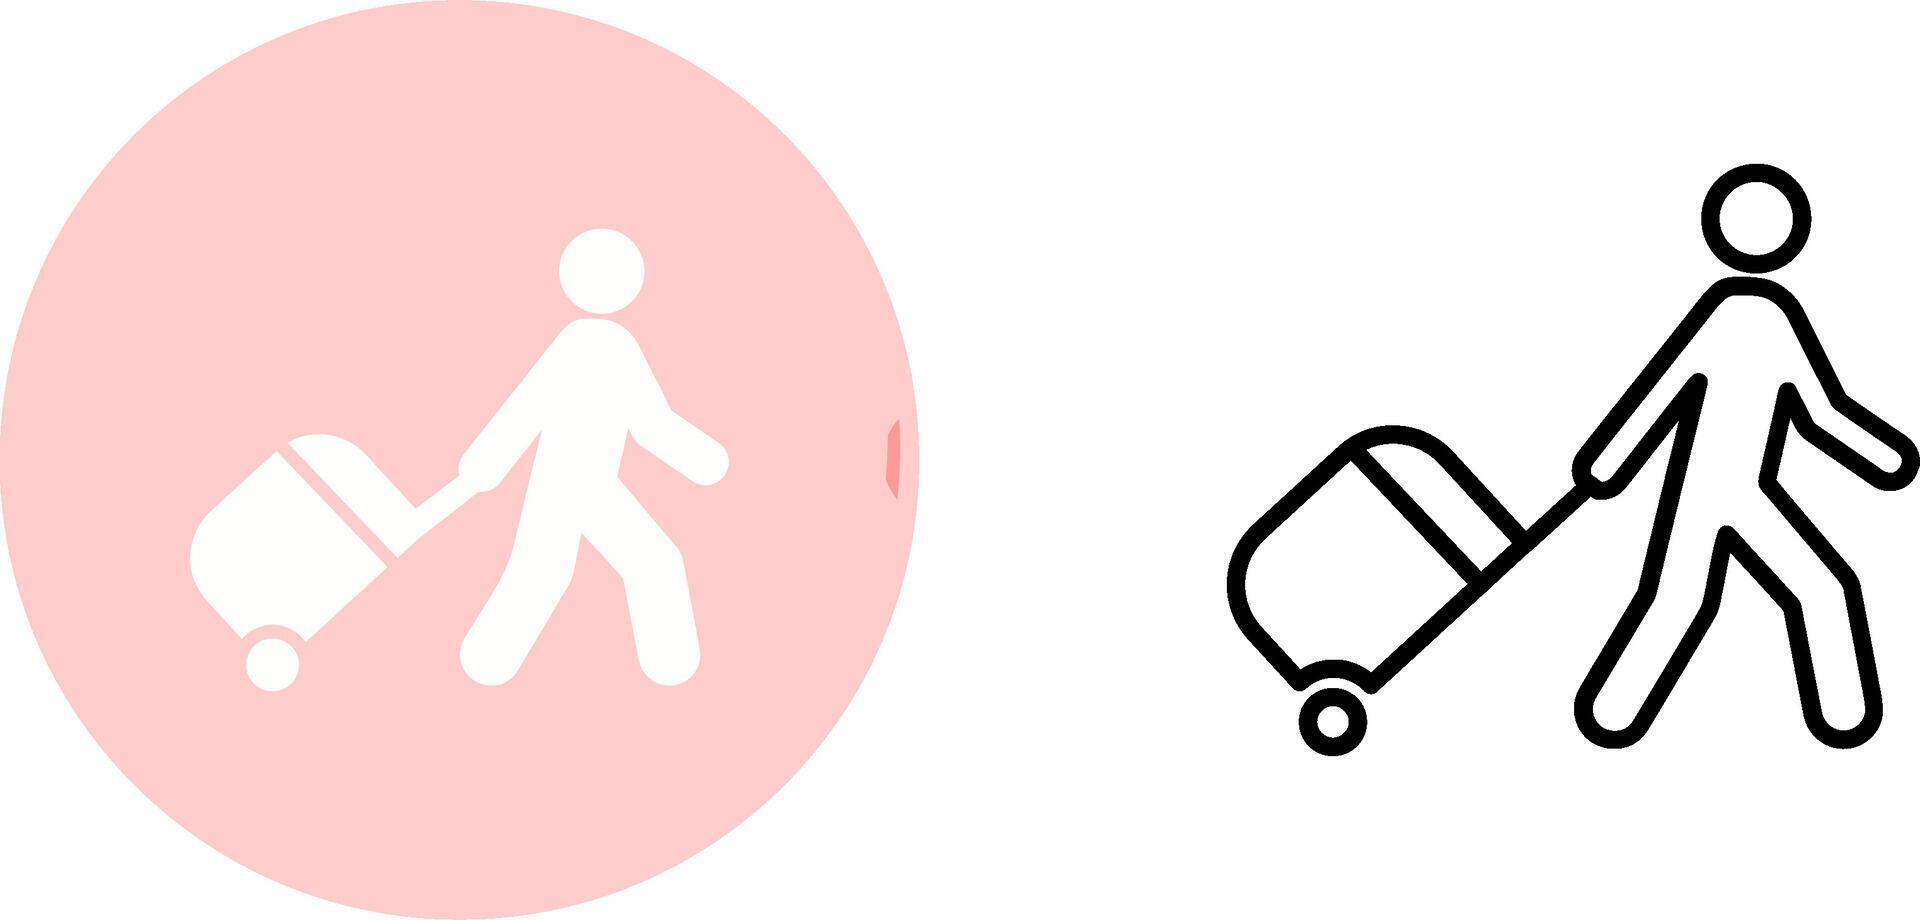 Walking With Luggage Vector Icon